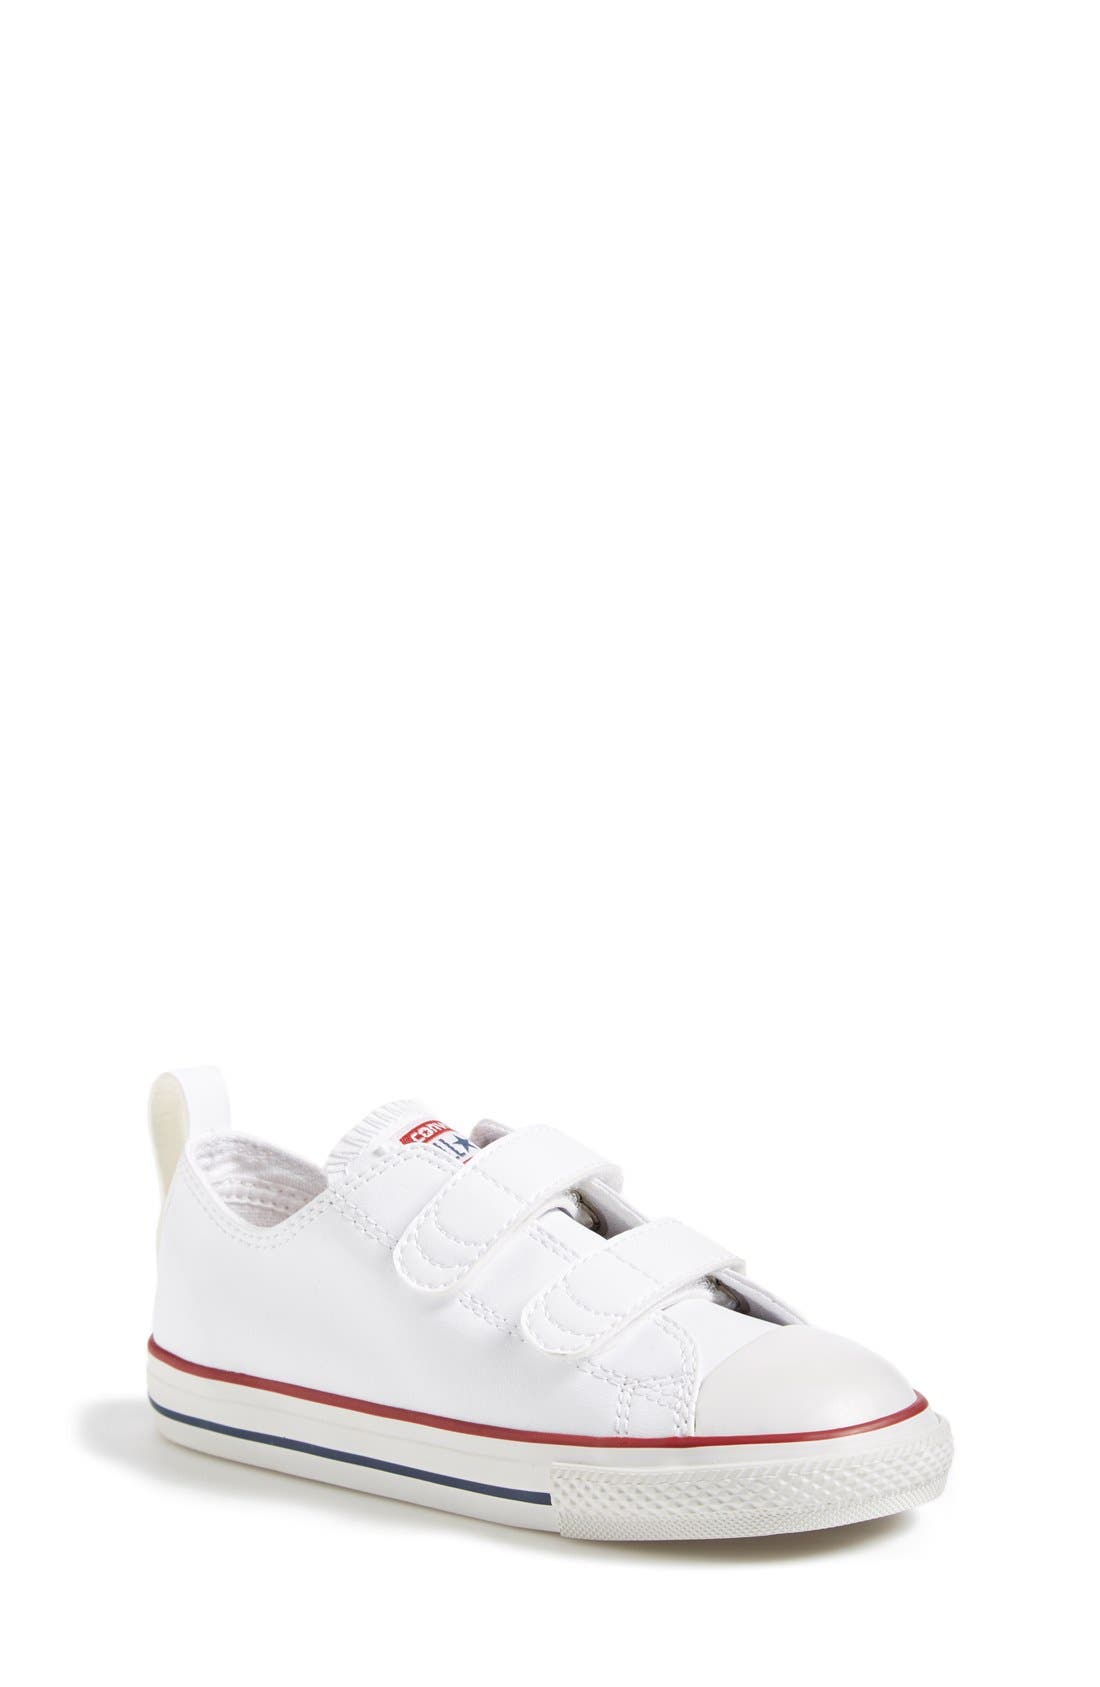 converse all star leather infant